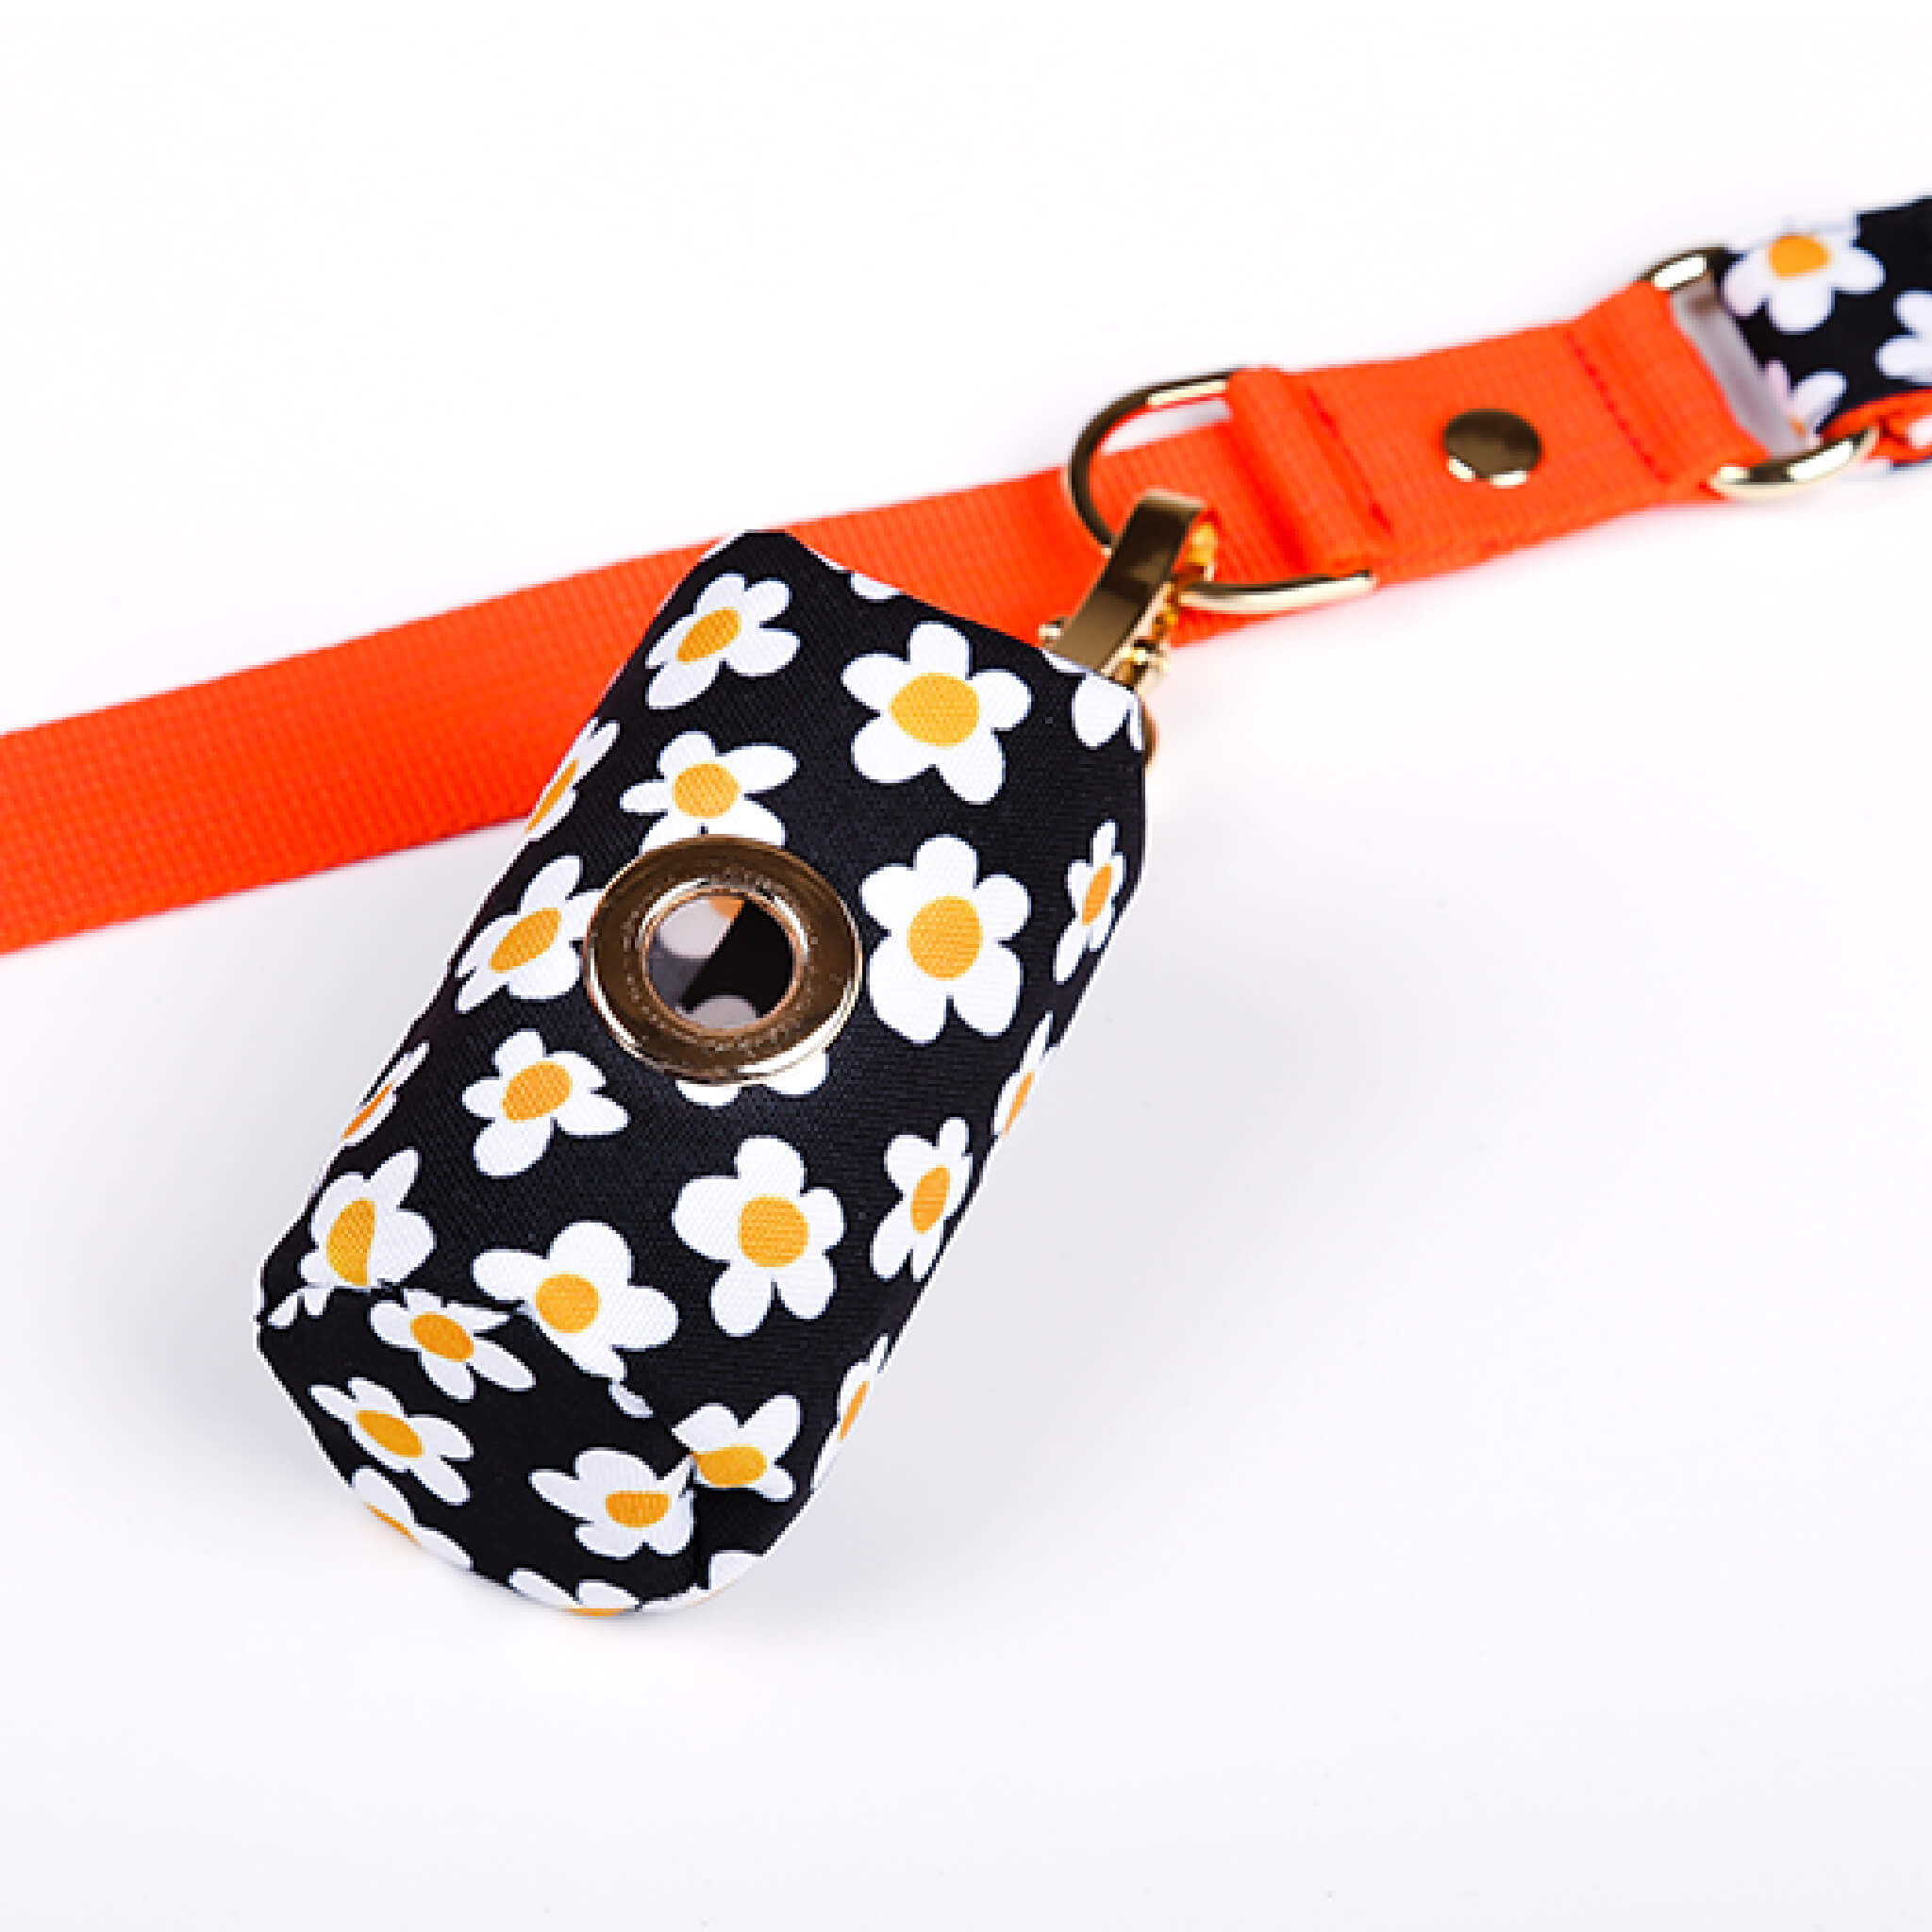 Poop bag holder with a daisy pattern attached to a leash.